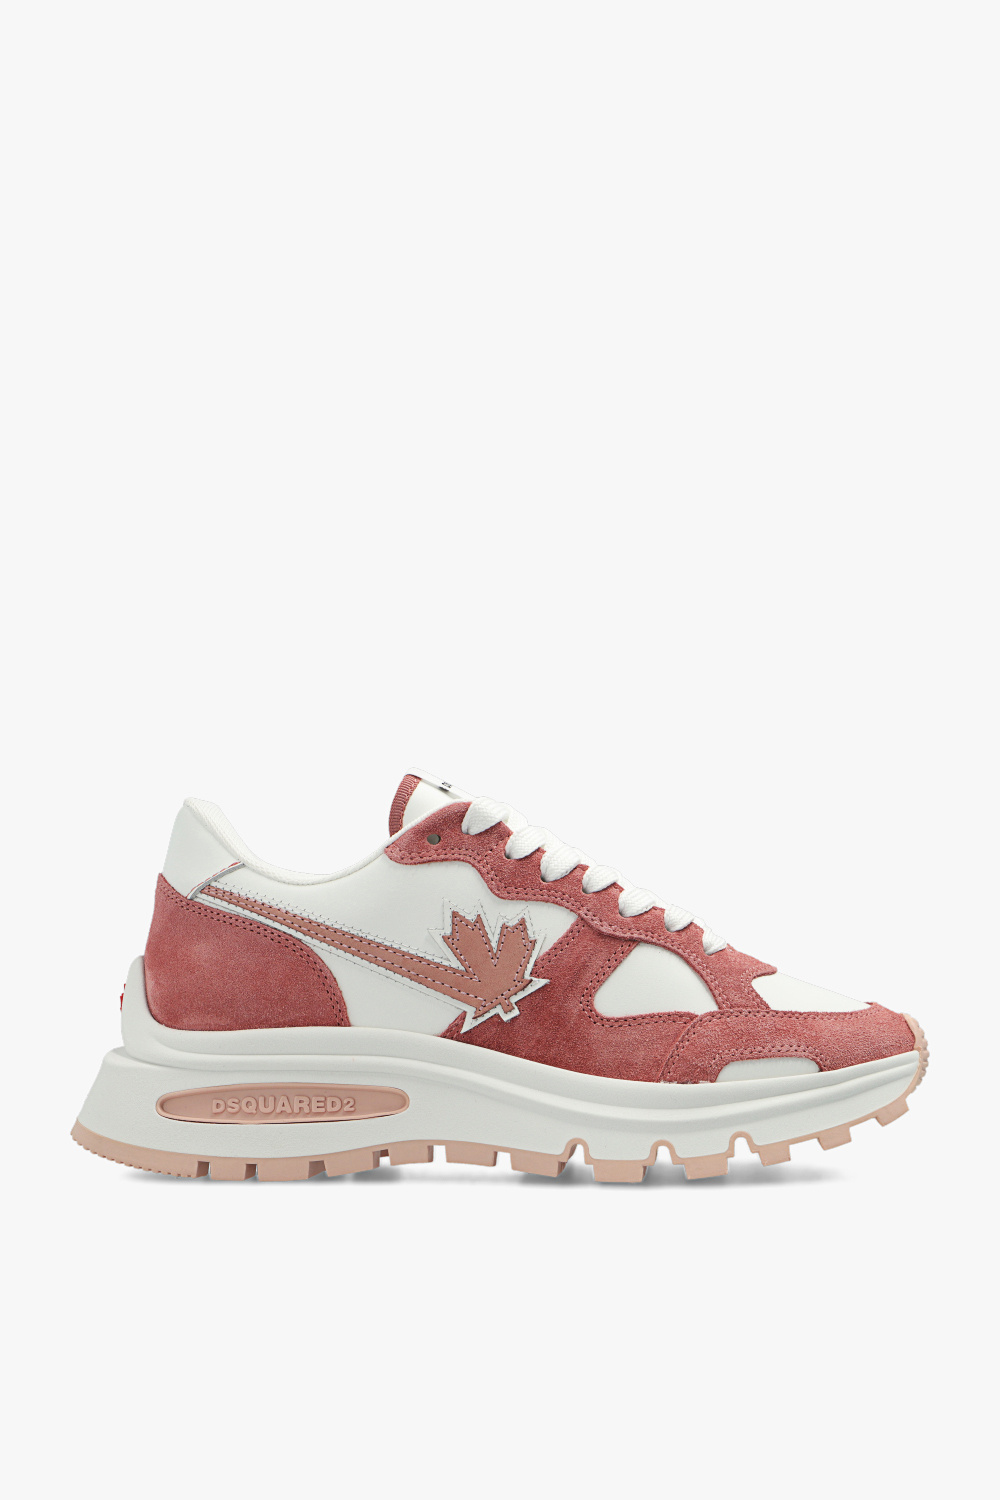 Dsquared2 ‘Run Ds2’ sneakers